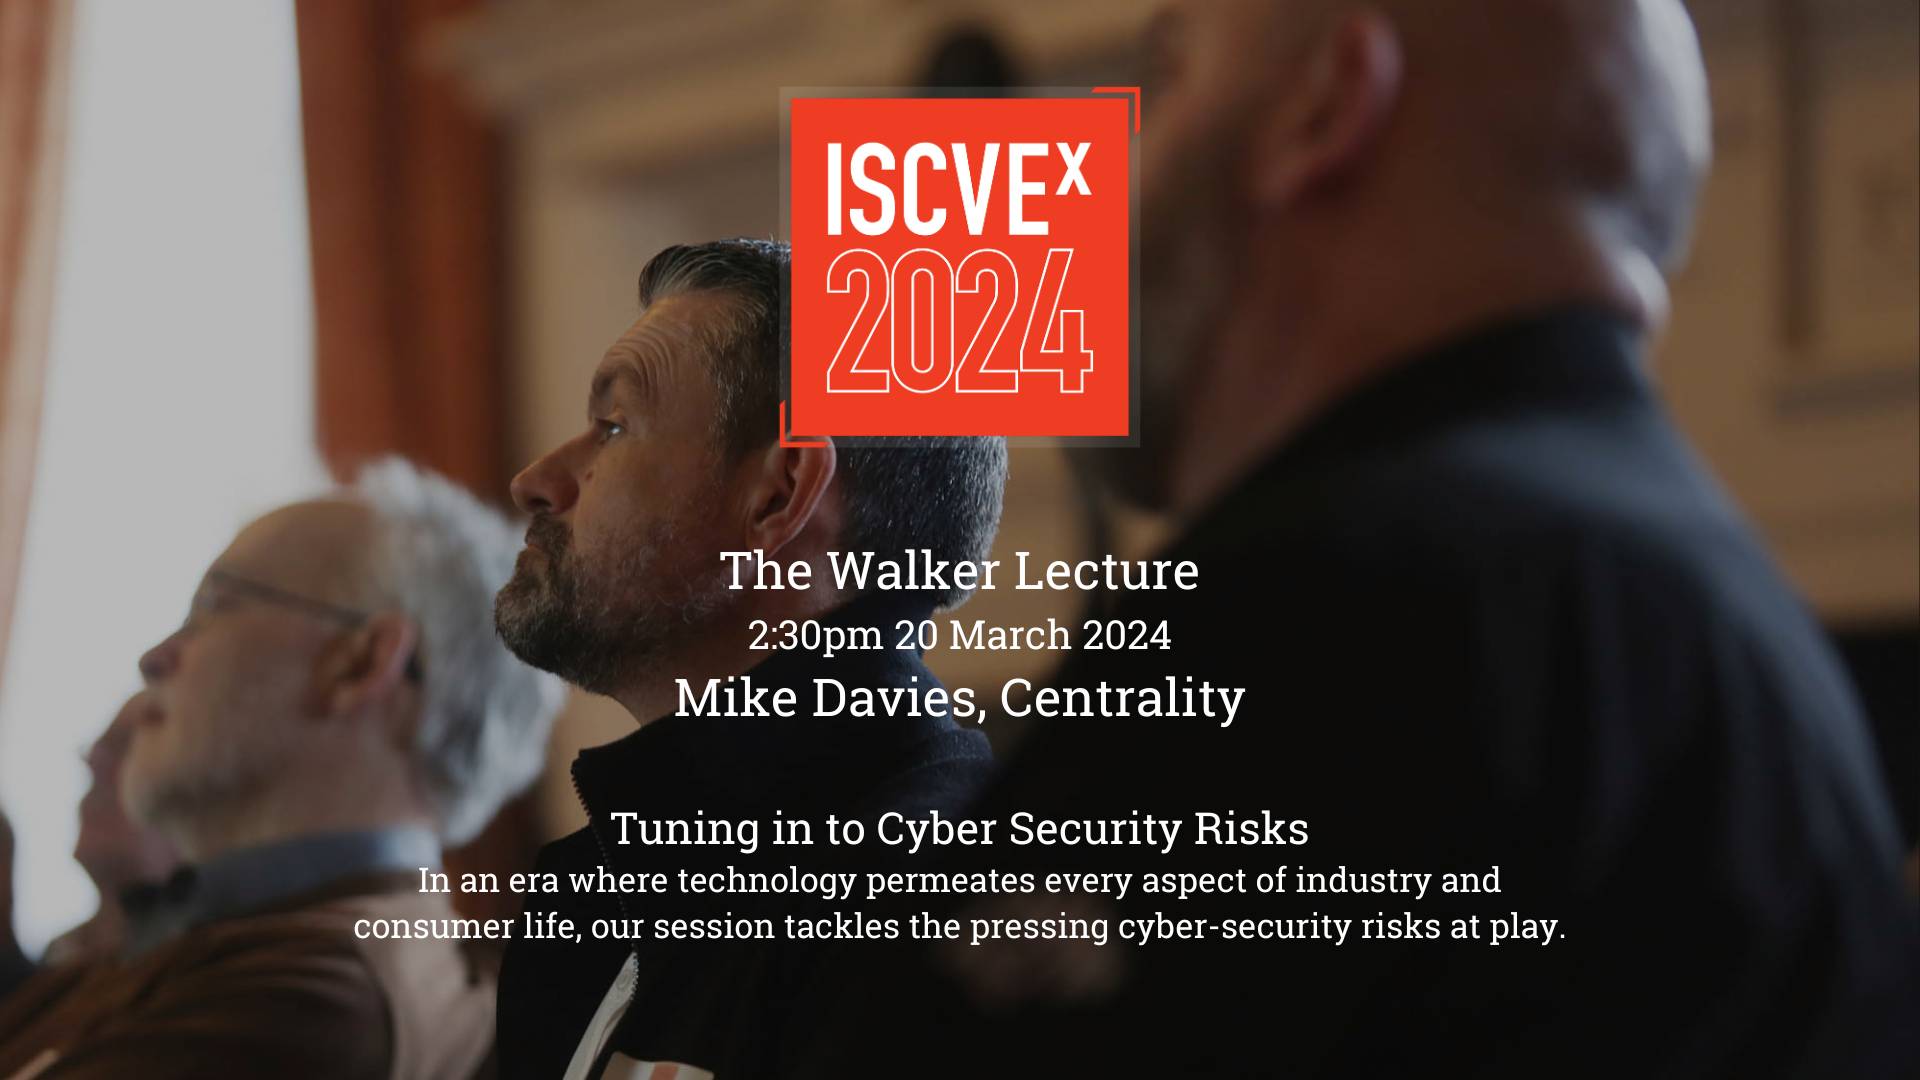 ISCVEx 2024 - YouTube Thumbnail - The Walker Lecture